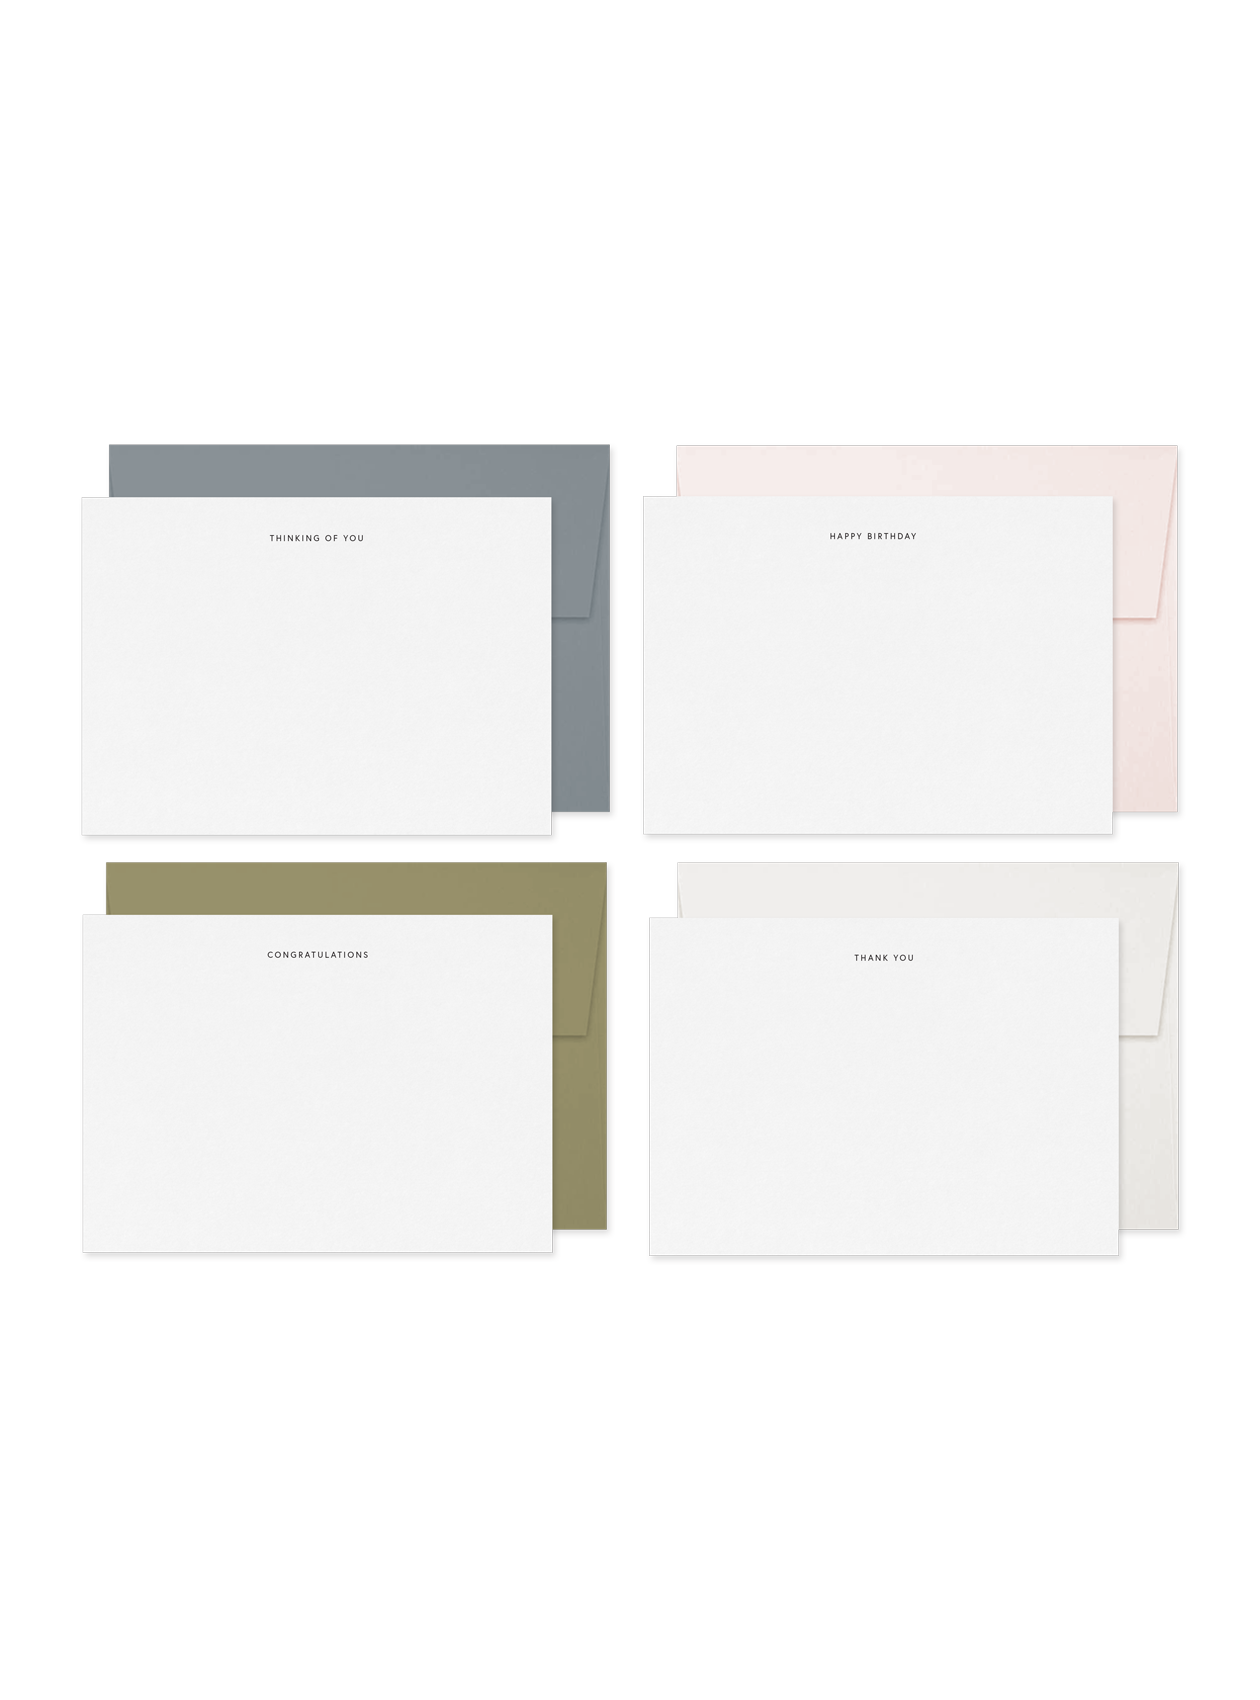 Appointed Desktop Greetings and envelopes, including: Thinking Of You, Happy Birthday, Congratulations, and Thank You